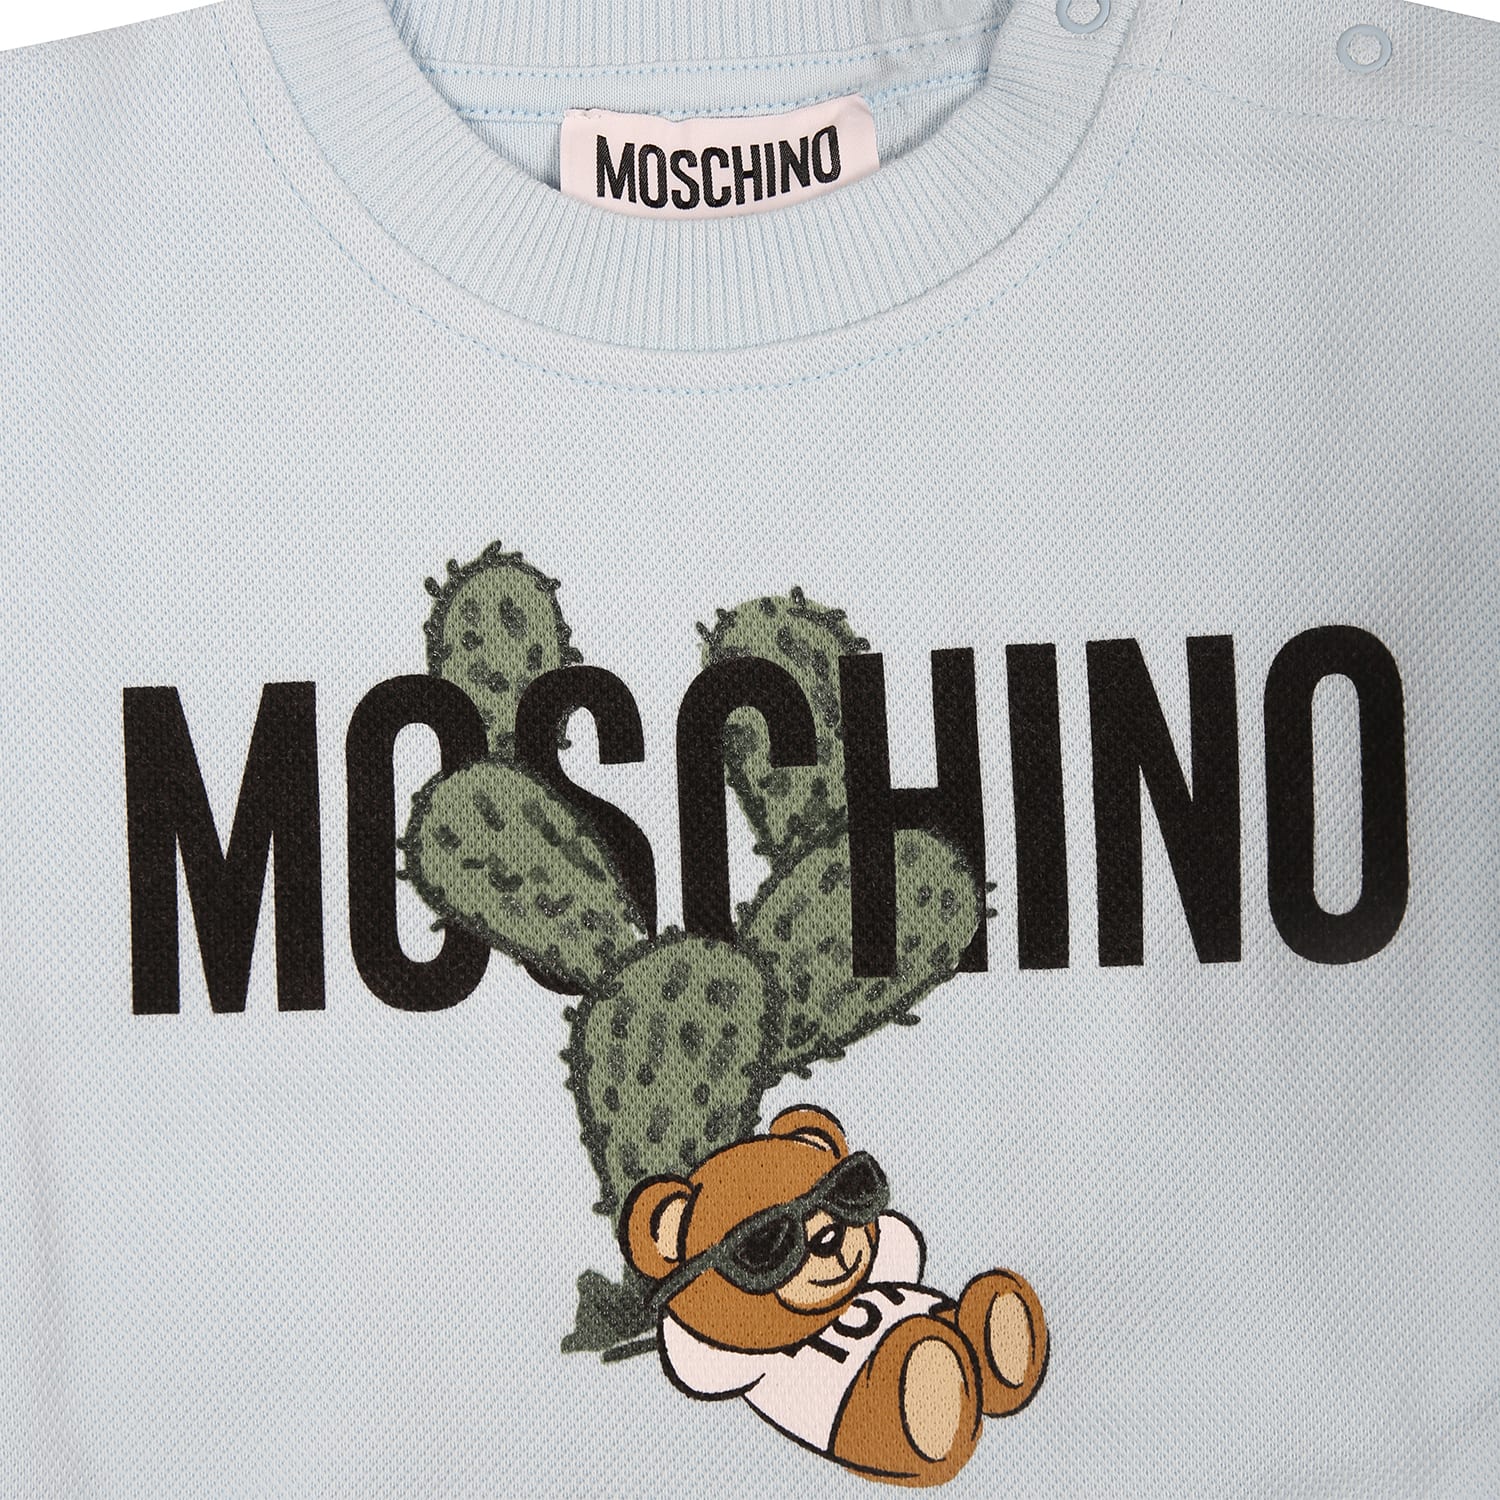 Shop Moschino Light Blue Set For Baby Boy With Teddy Bear And Logo